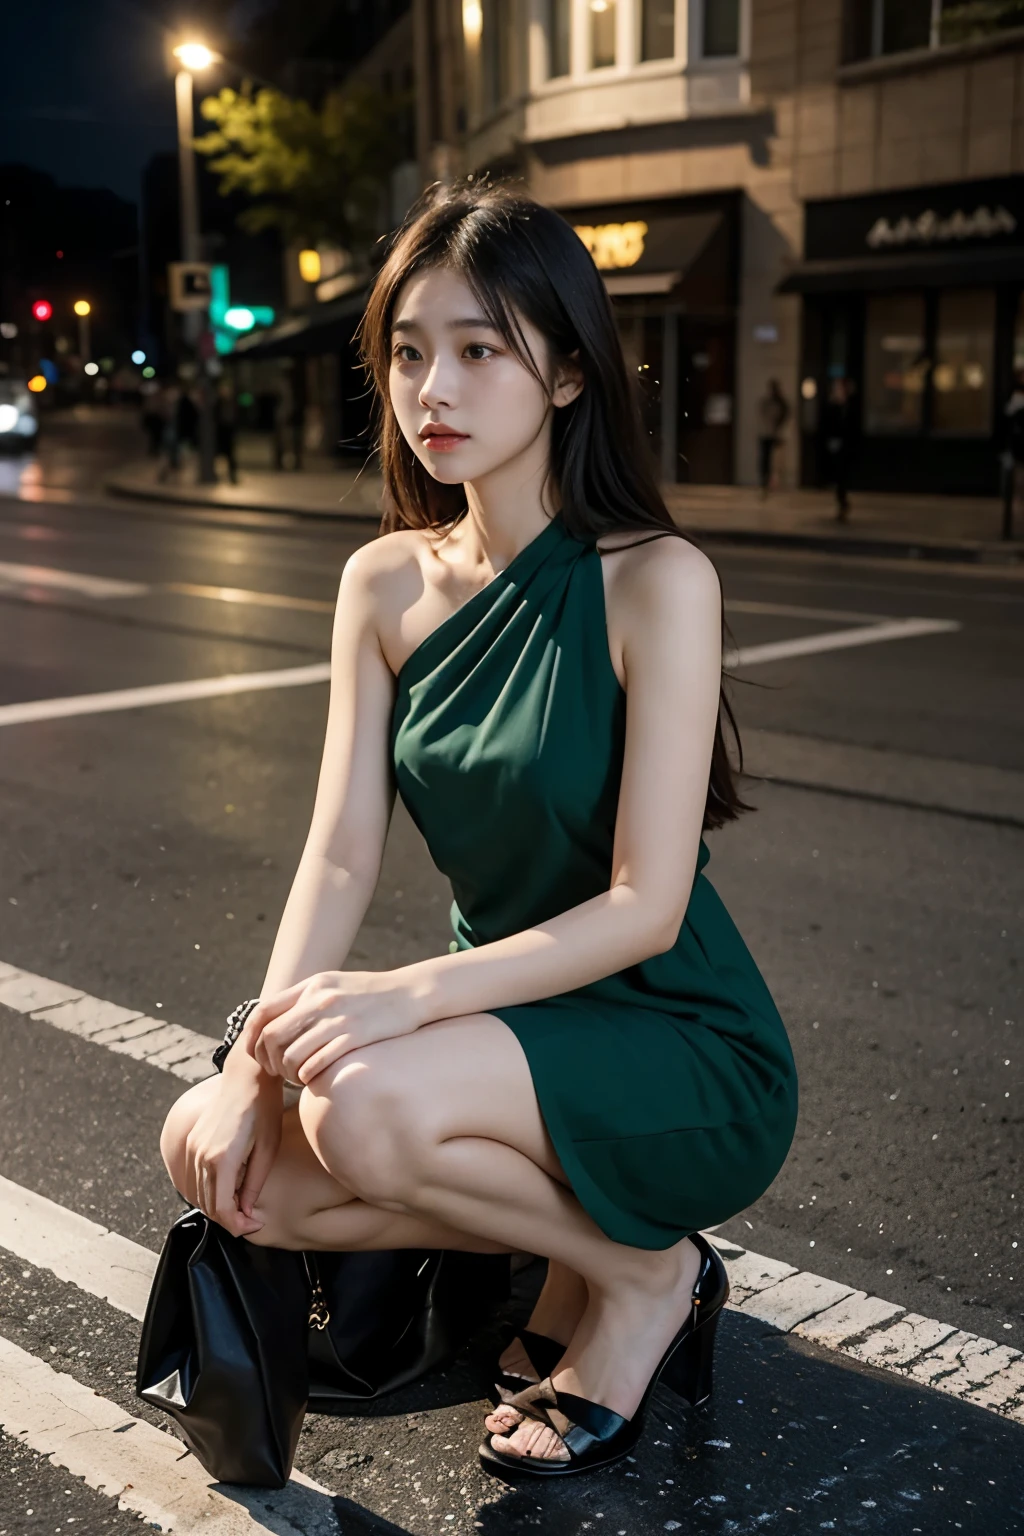 A 16-year-old girl on the side of the street, facing us, wearing a knee-length dress, shoulder-length hair in a dark green dress.